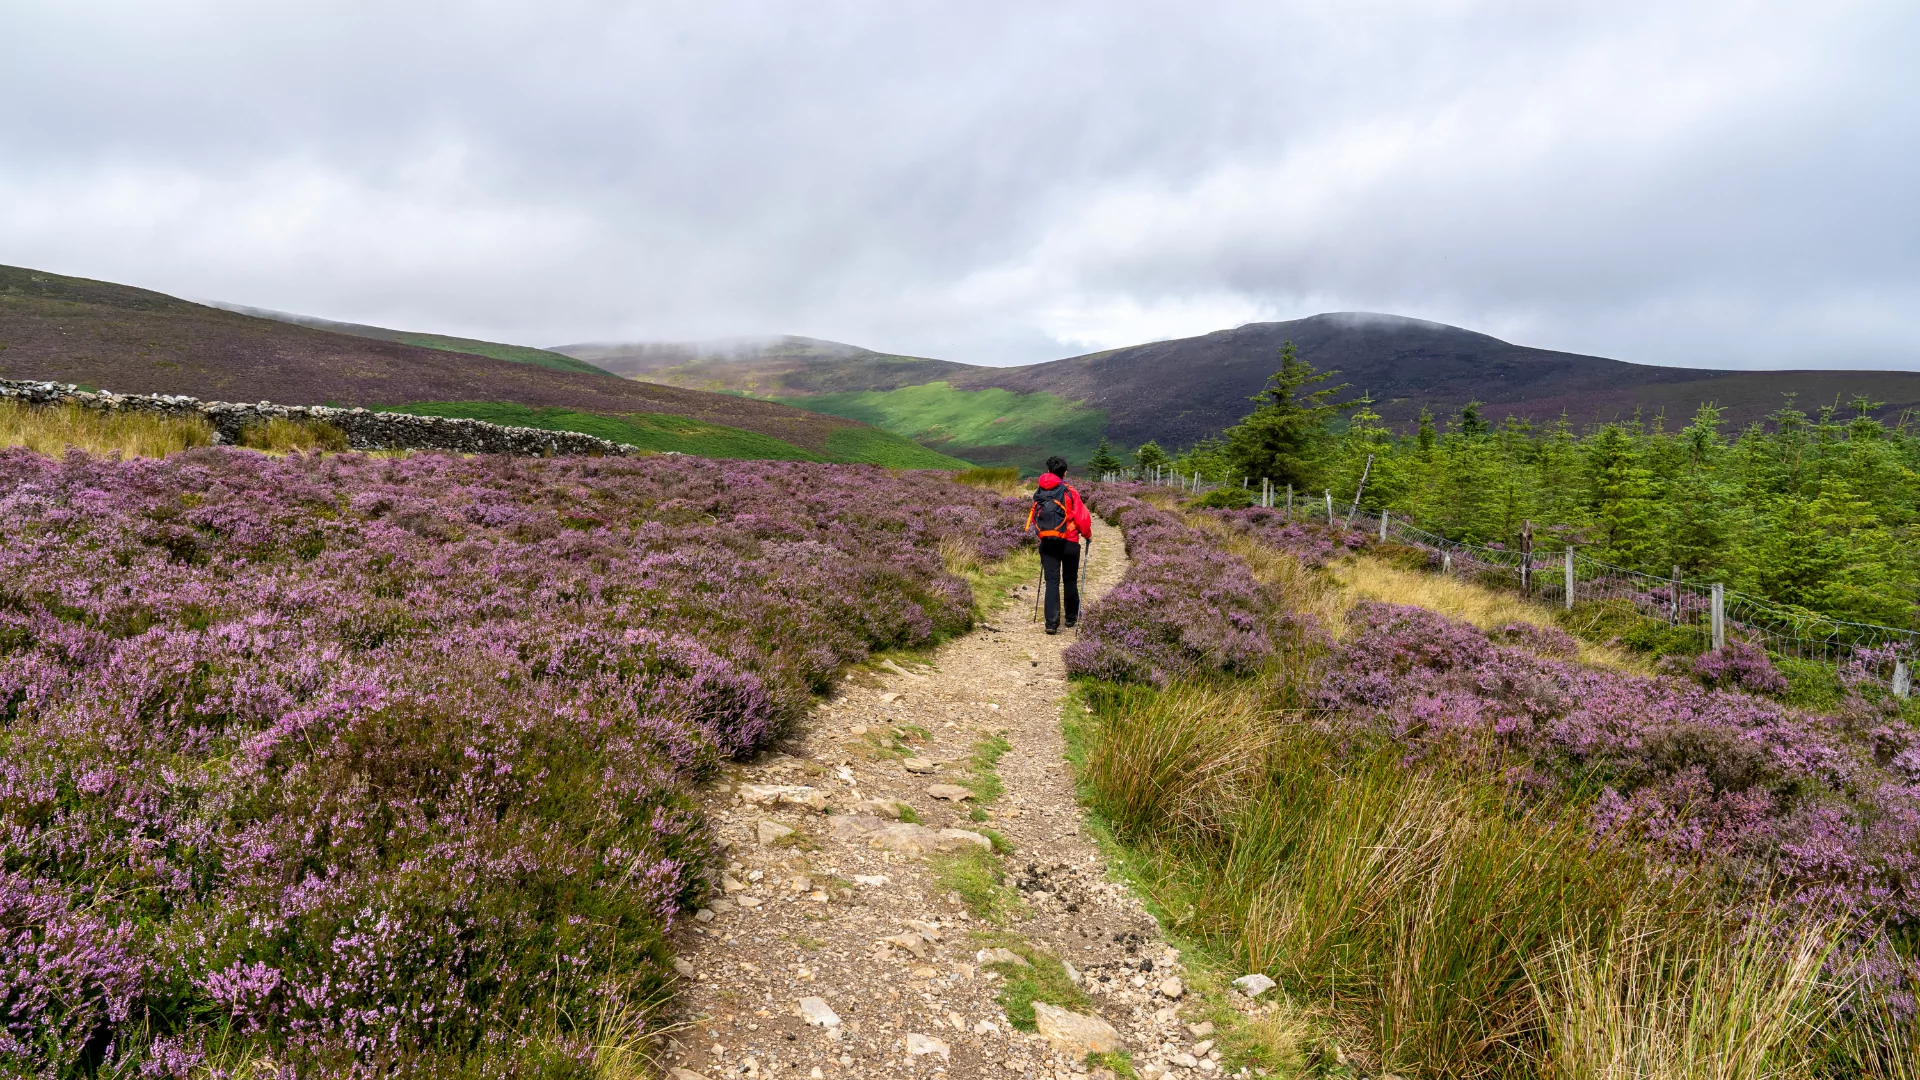 The Wicklow Way hiking trail in Ireland